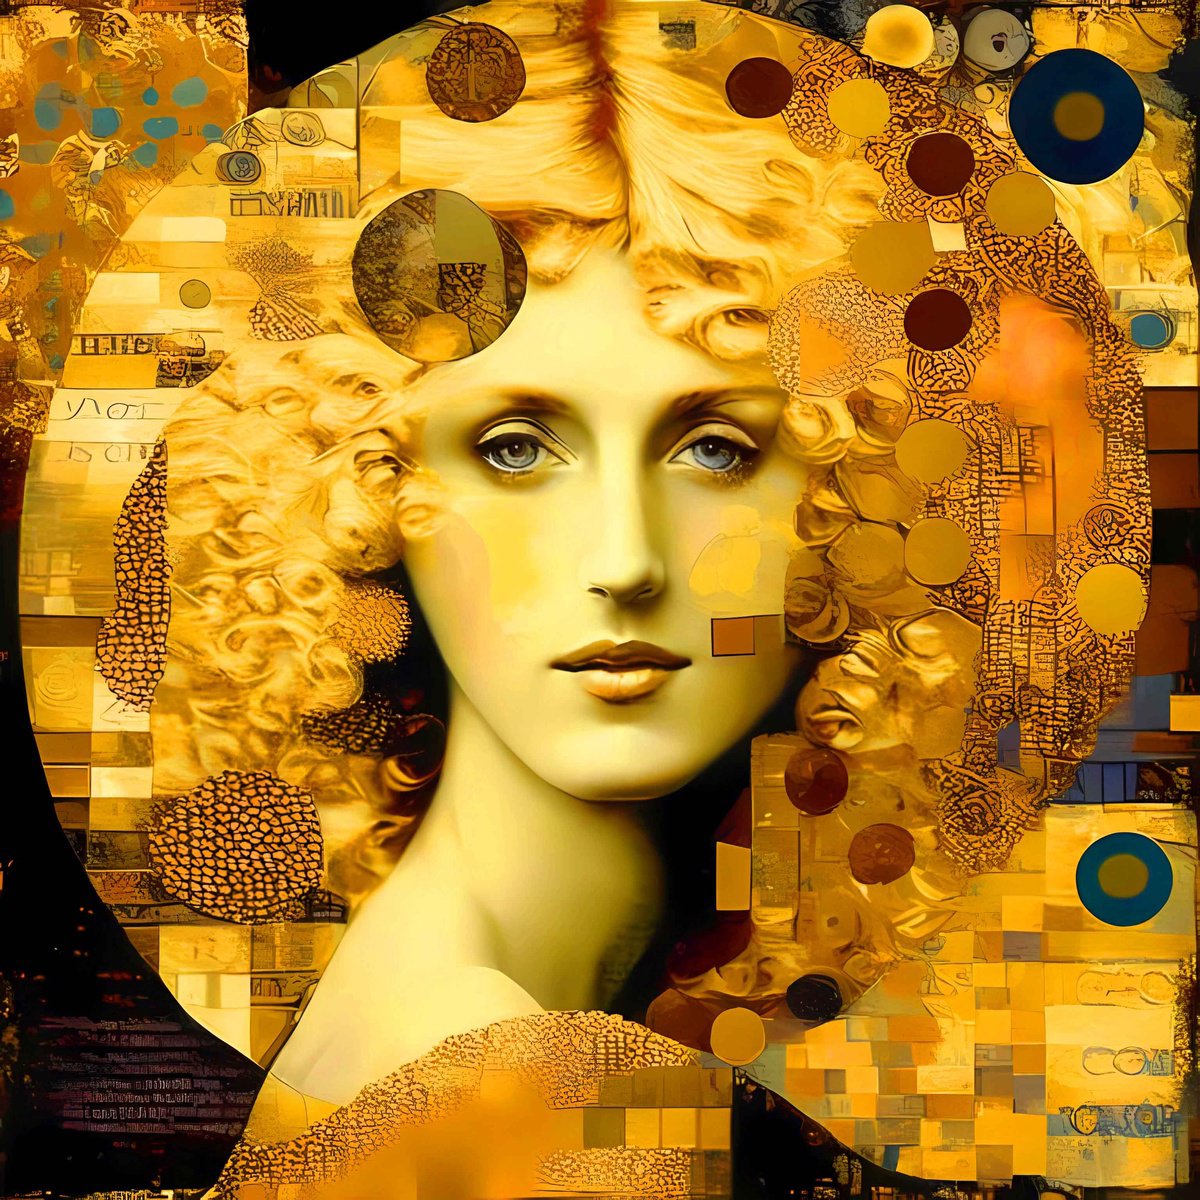 Blonde woman in gold - contemporary female portrait, geometry abstract Digital art print o... by BAST